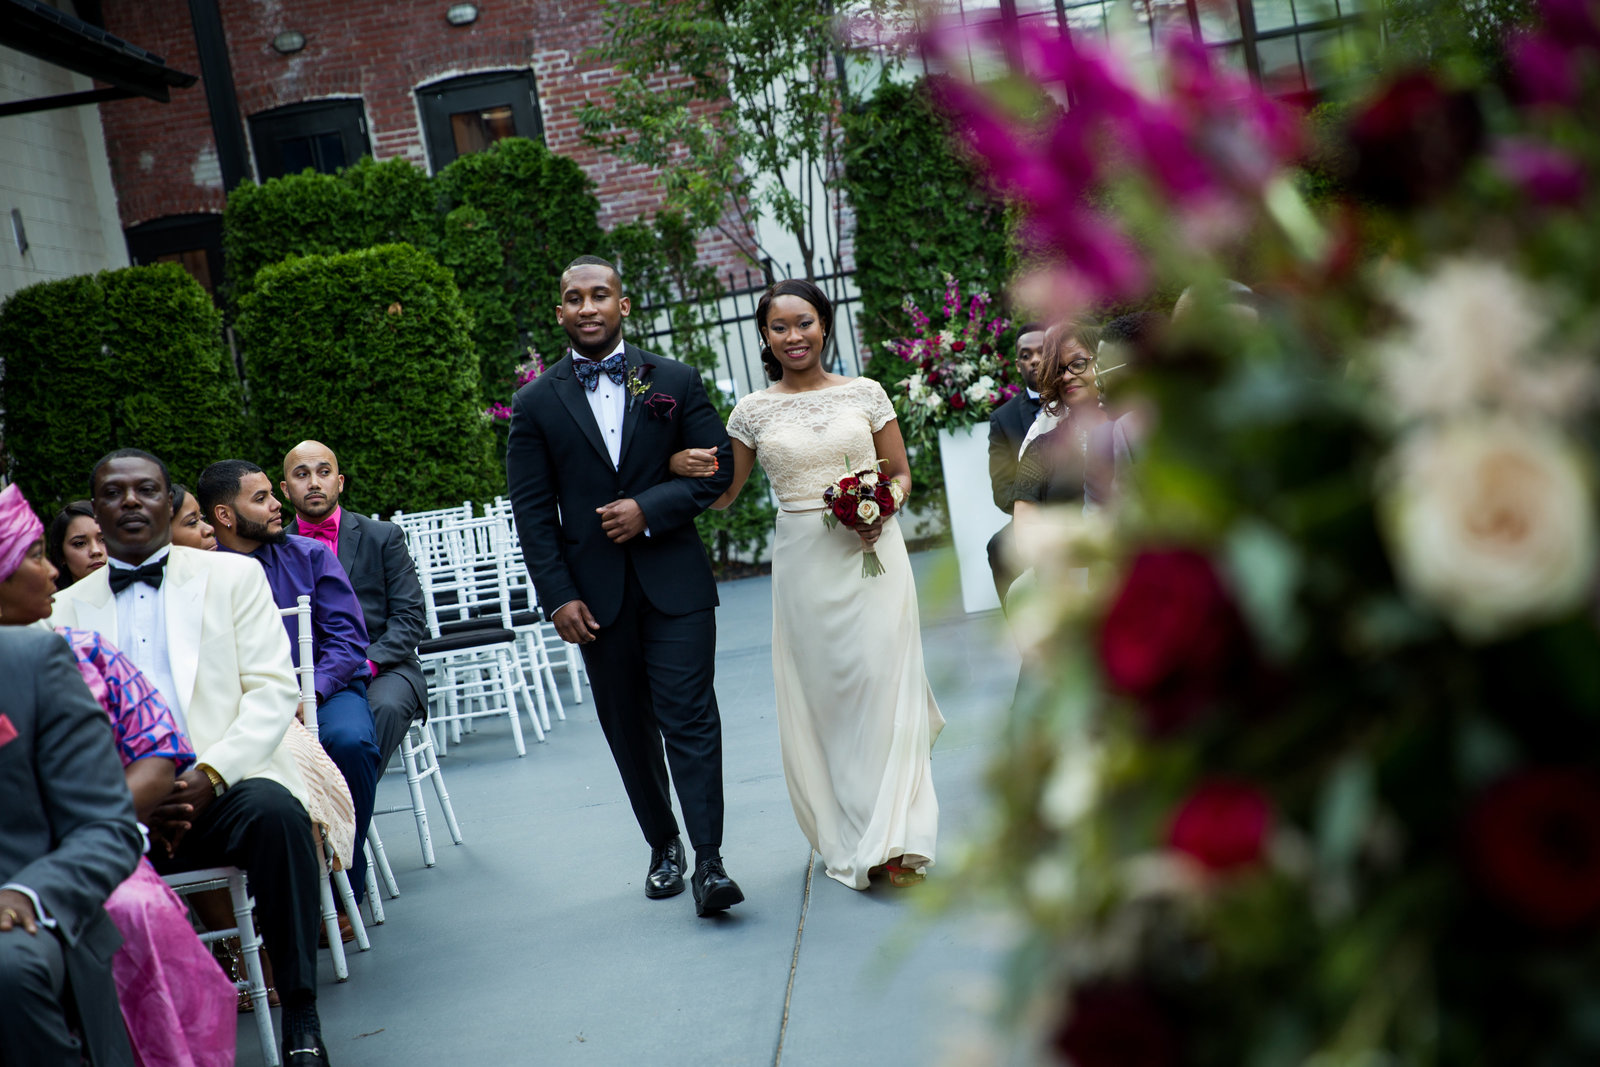 Wedding ceremony at Vie Philadelphia floral design by Carl Alan Floral  photos  by Greg Davenport Photography